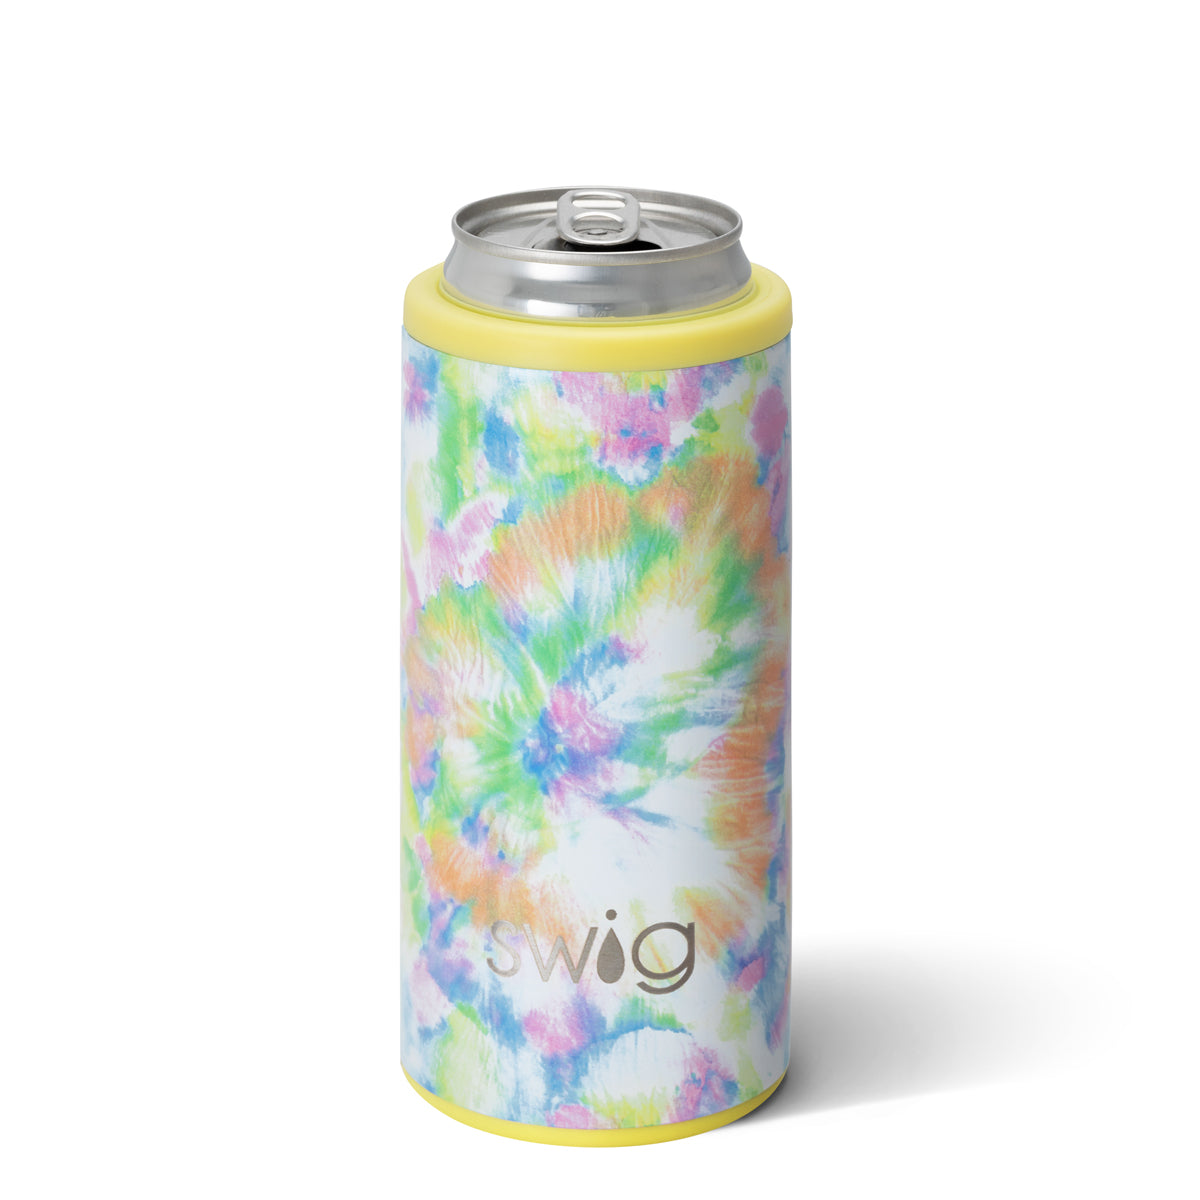 Swig Skinny Can Cooler 12oz – Southern Bliss